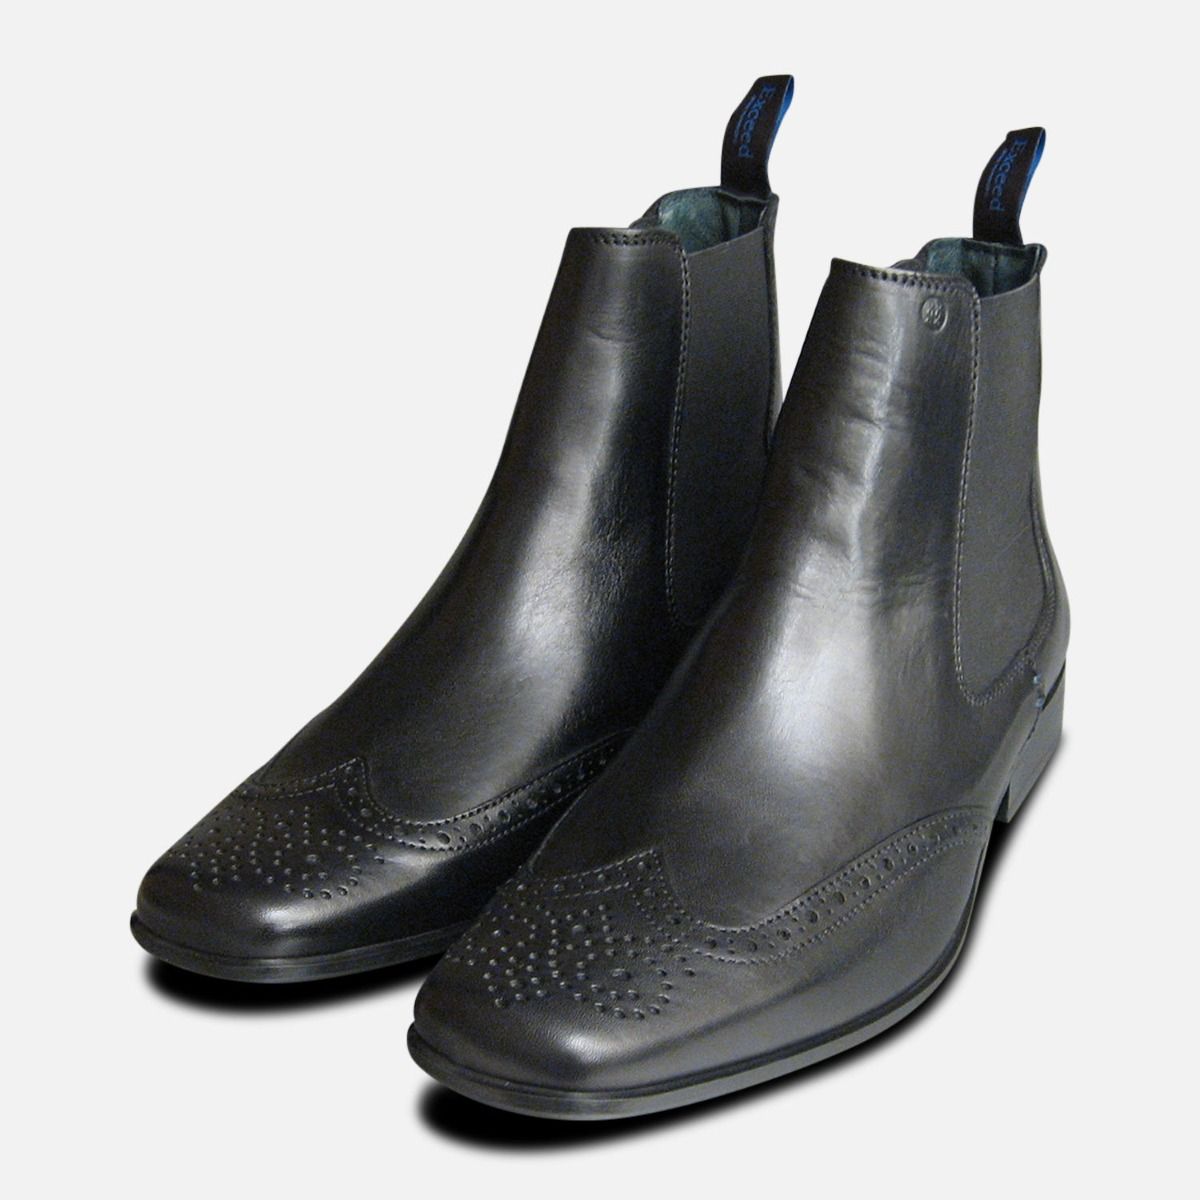 Exceed Brogue Mens Chelsea Boots